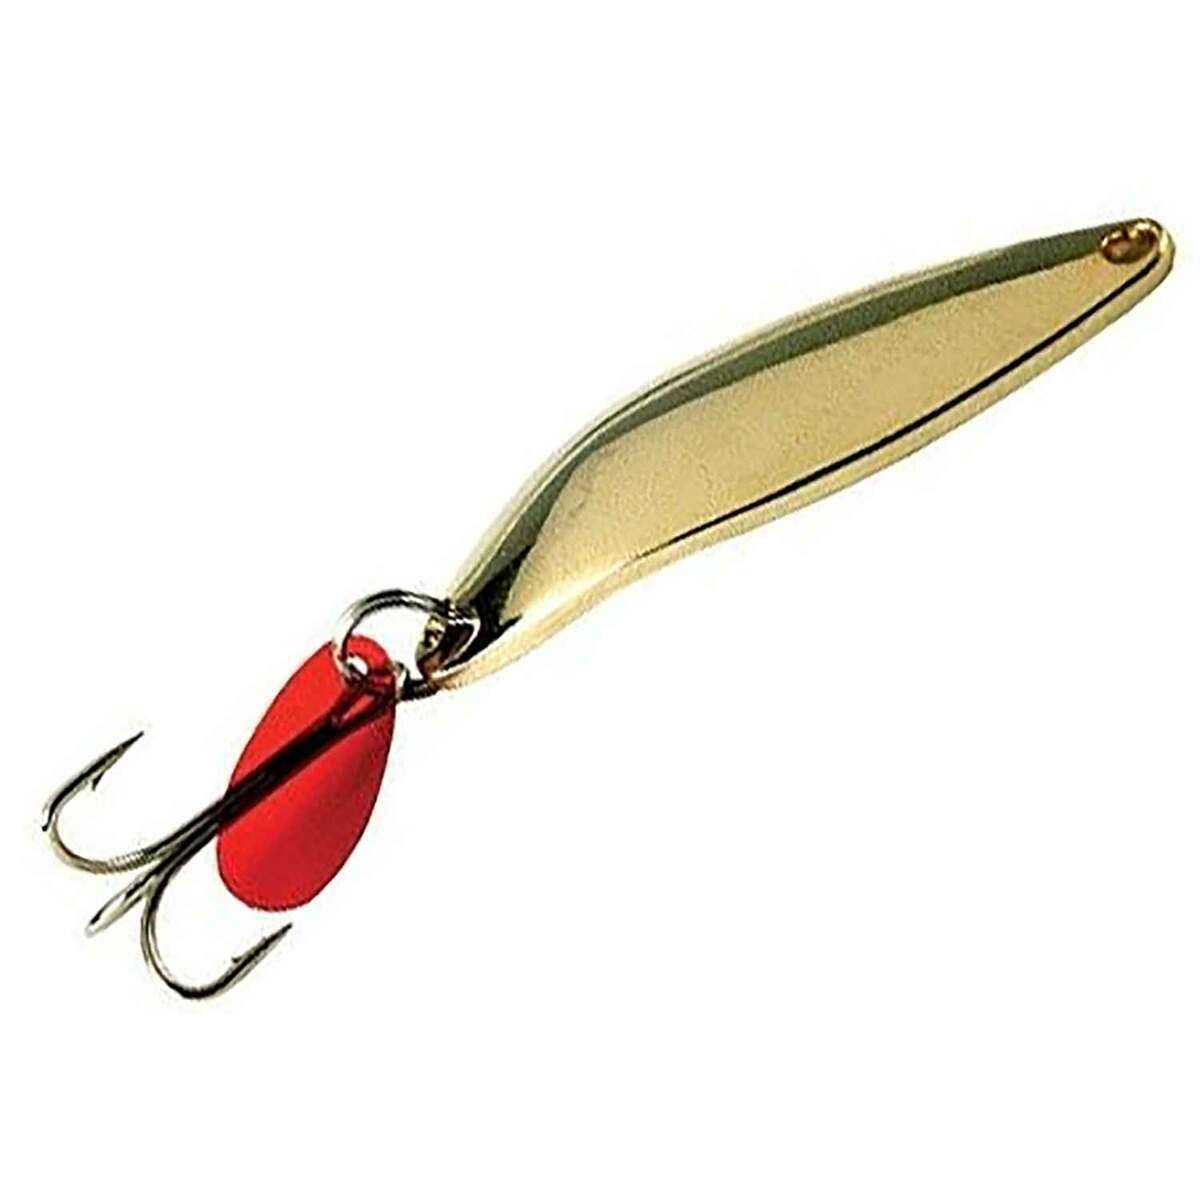 Fishing Lures for sale in Old Minto, Alaska, Facebook Marketplace